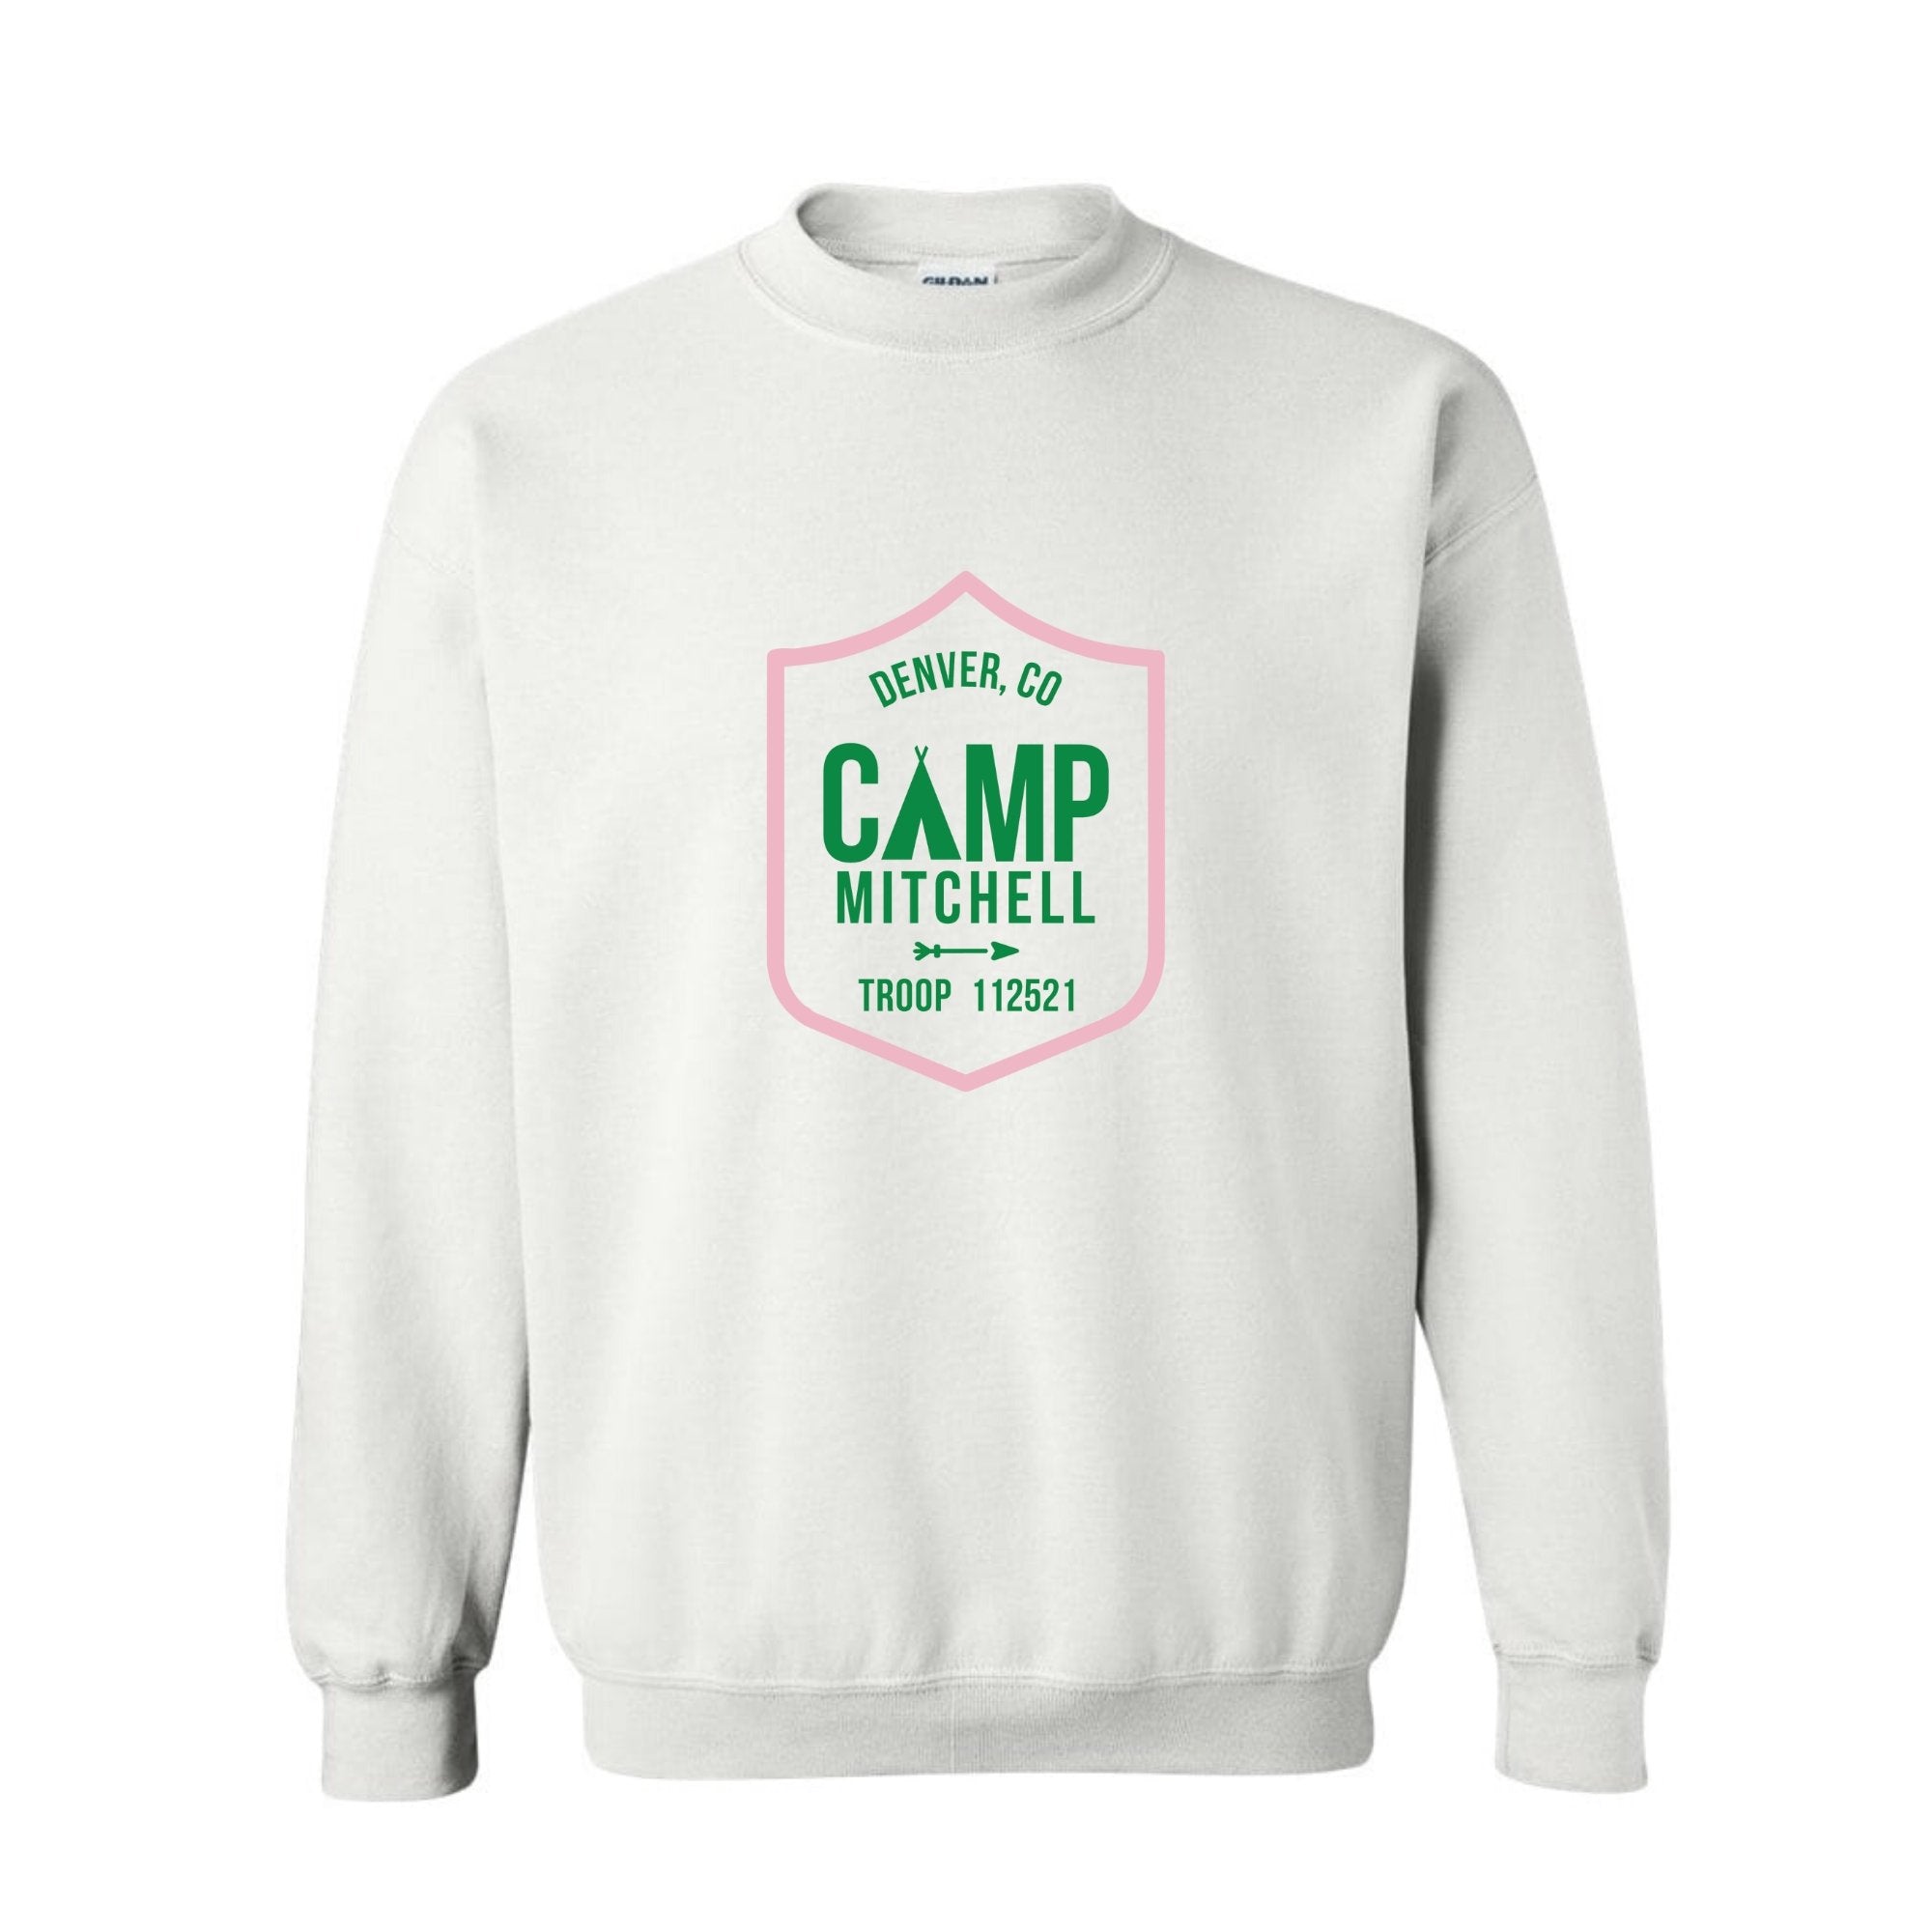 A white sweatshirt is customized with a green and pink camp logo